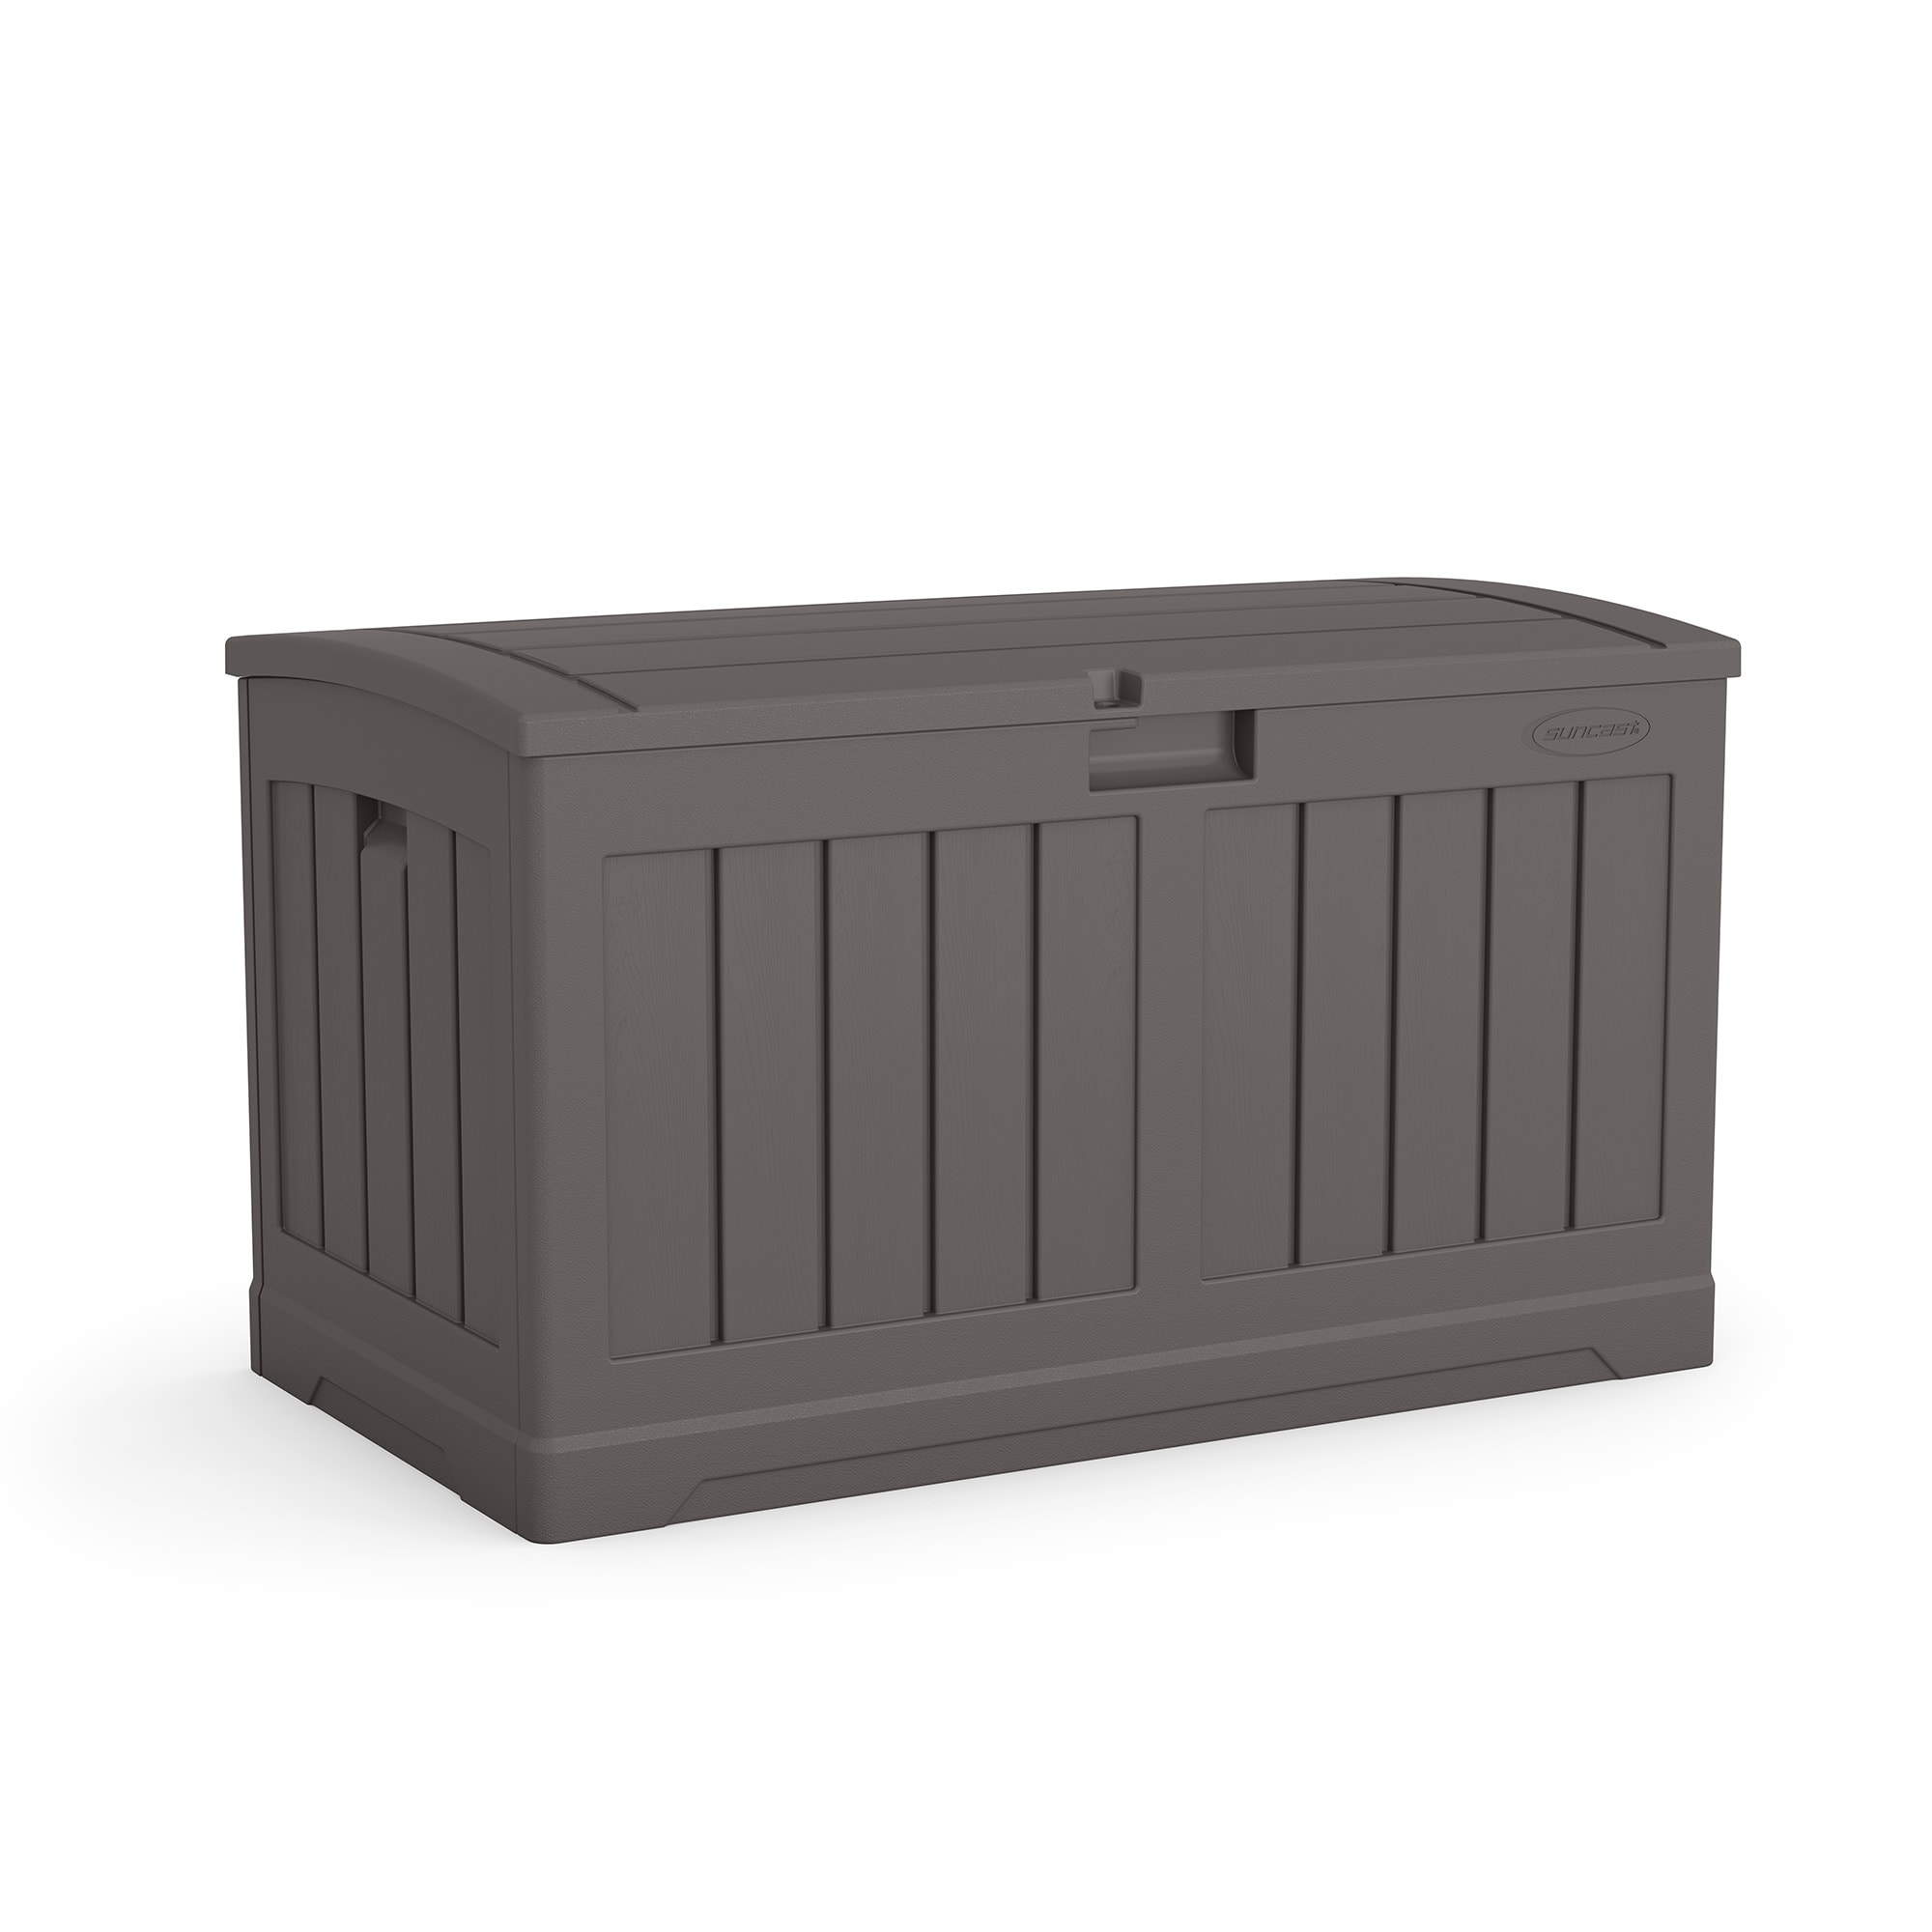 Keter Pacific 30-Gallon Outdoor Large Waste Basket Trash Can With Lid &  Reviews